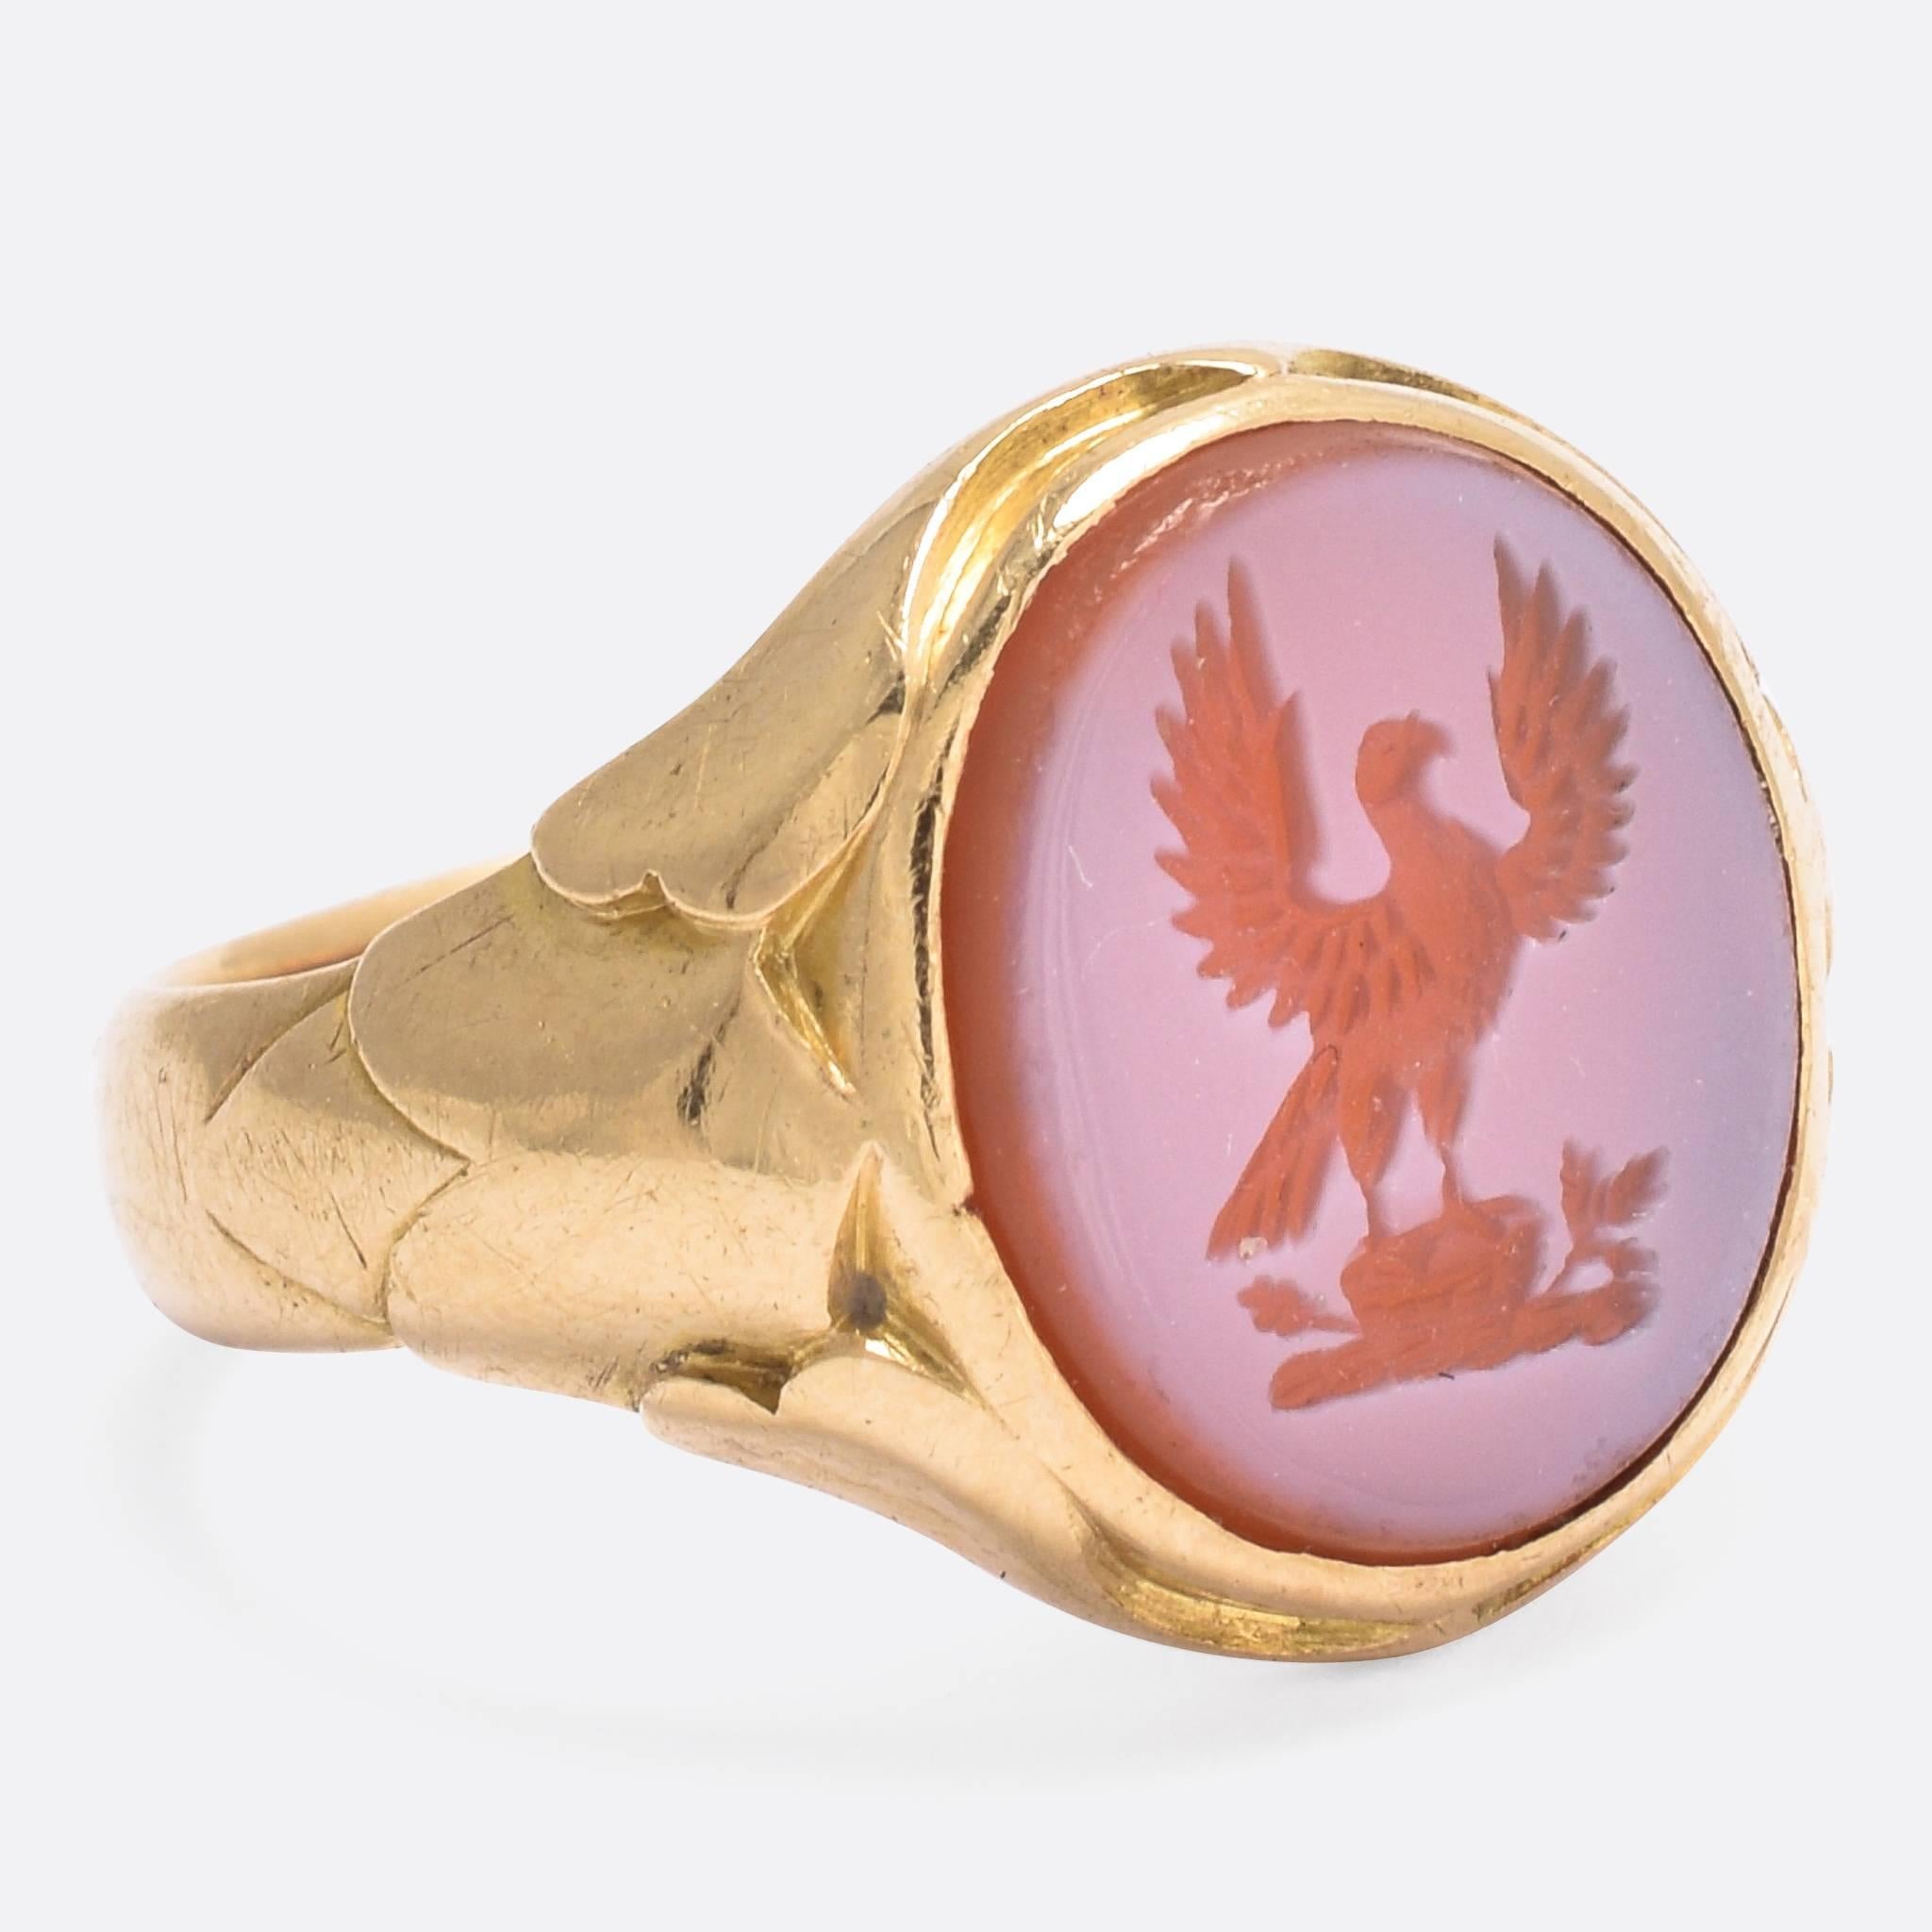 This antique signet ring has been carved with an heraldic intaglio crest depicting a hawk, with wings spread out, perched on top of an oak tree stump with tiny little oak leaves. According to Fairbairn's Book of Crest, this particular seal was used